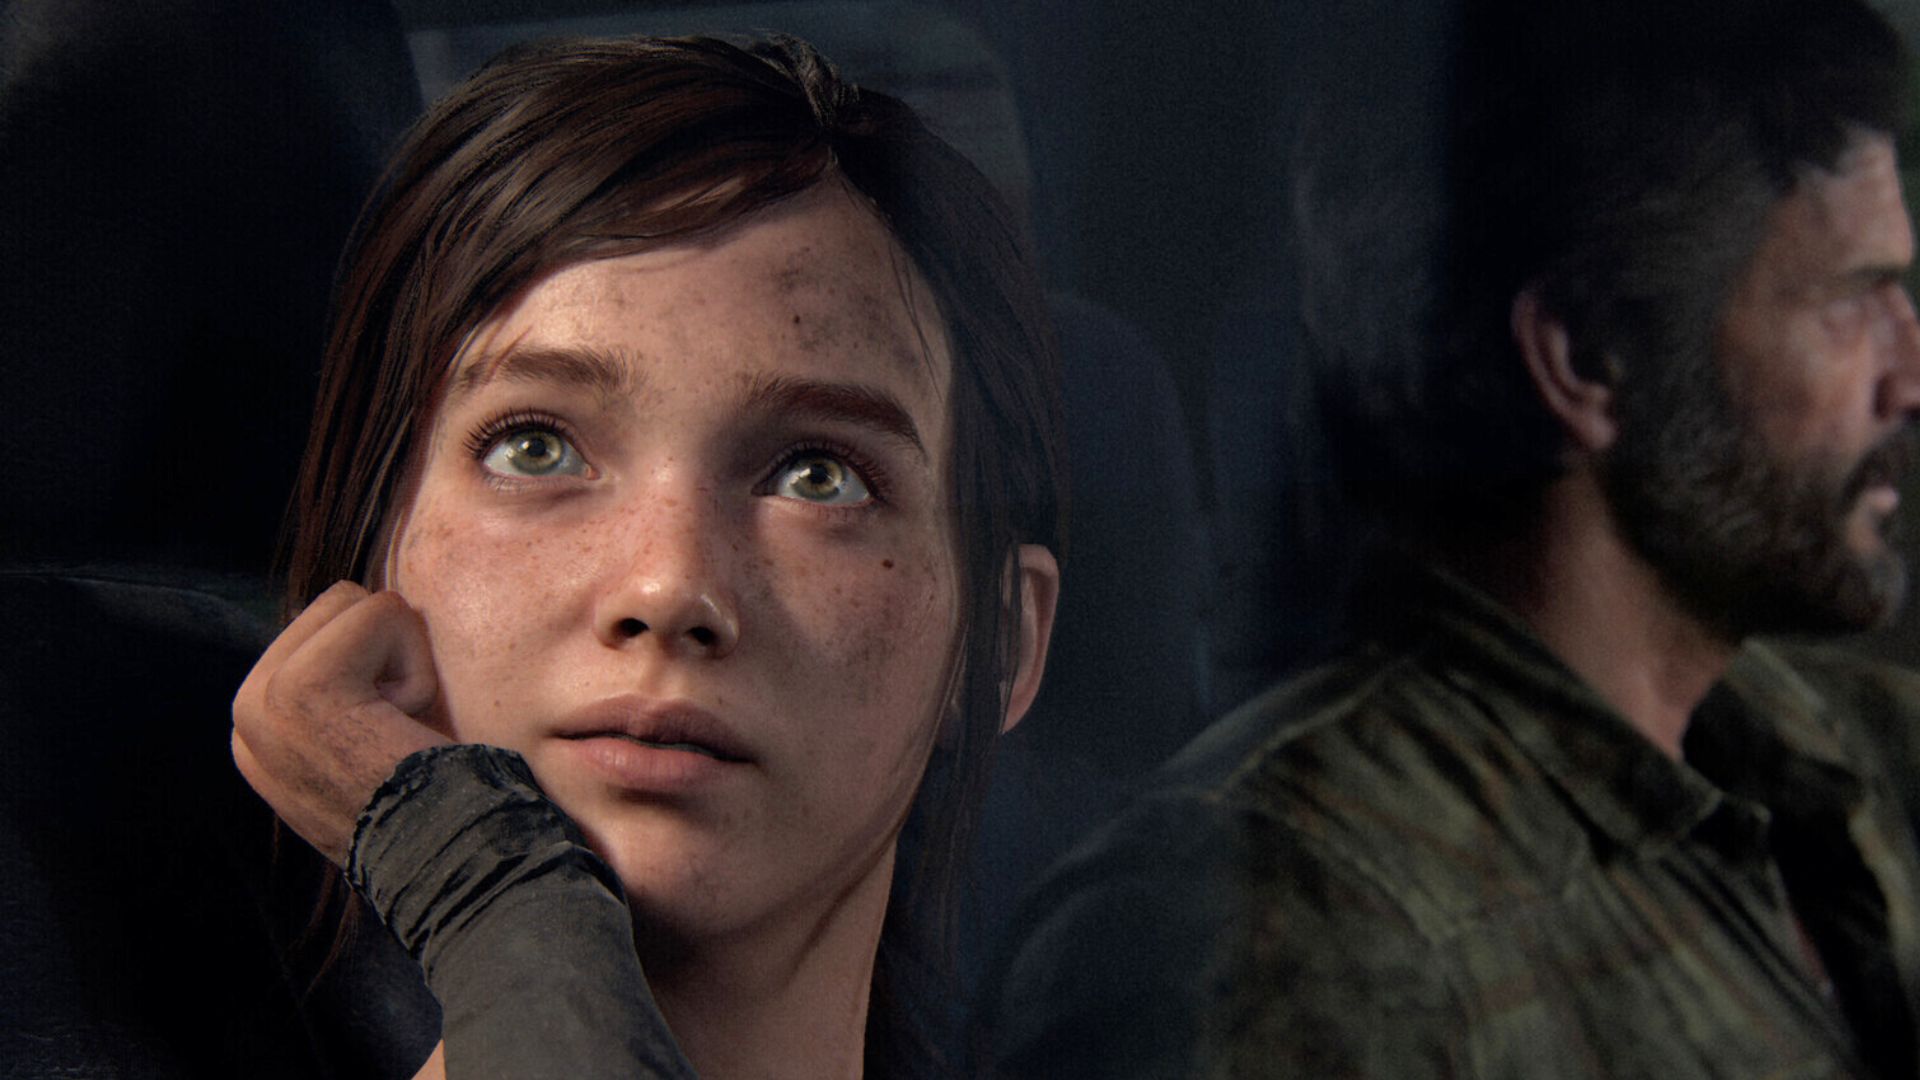 The Last of Us PC preloads are here, and just in time too